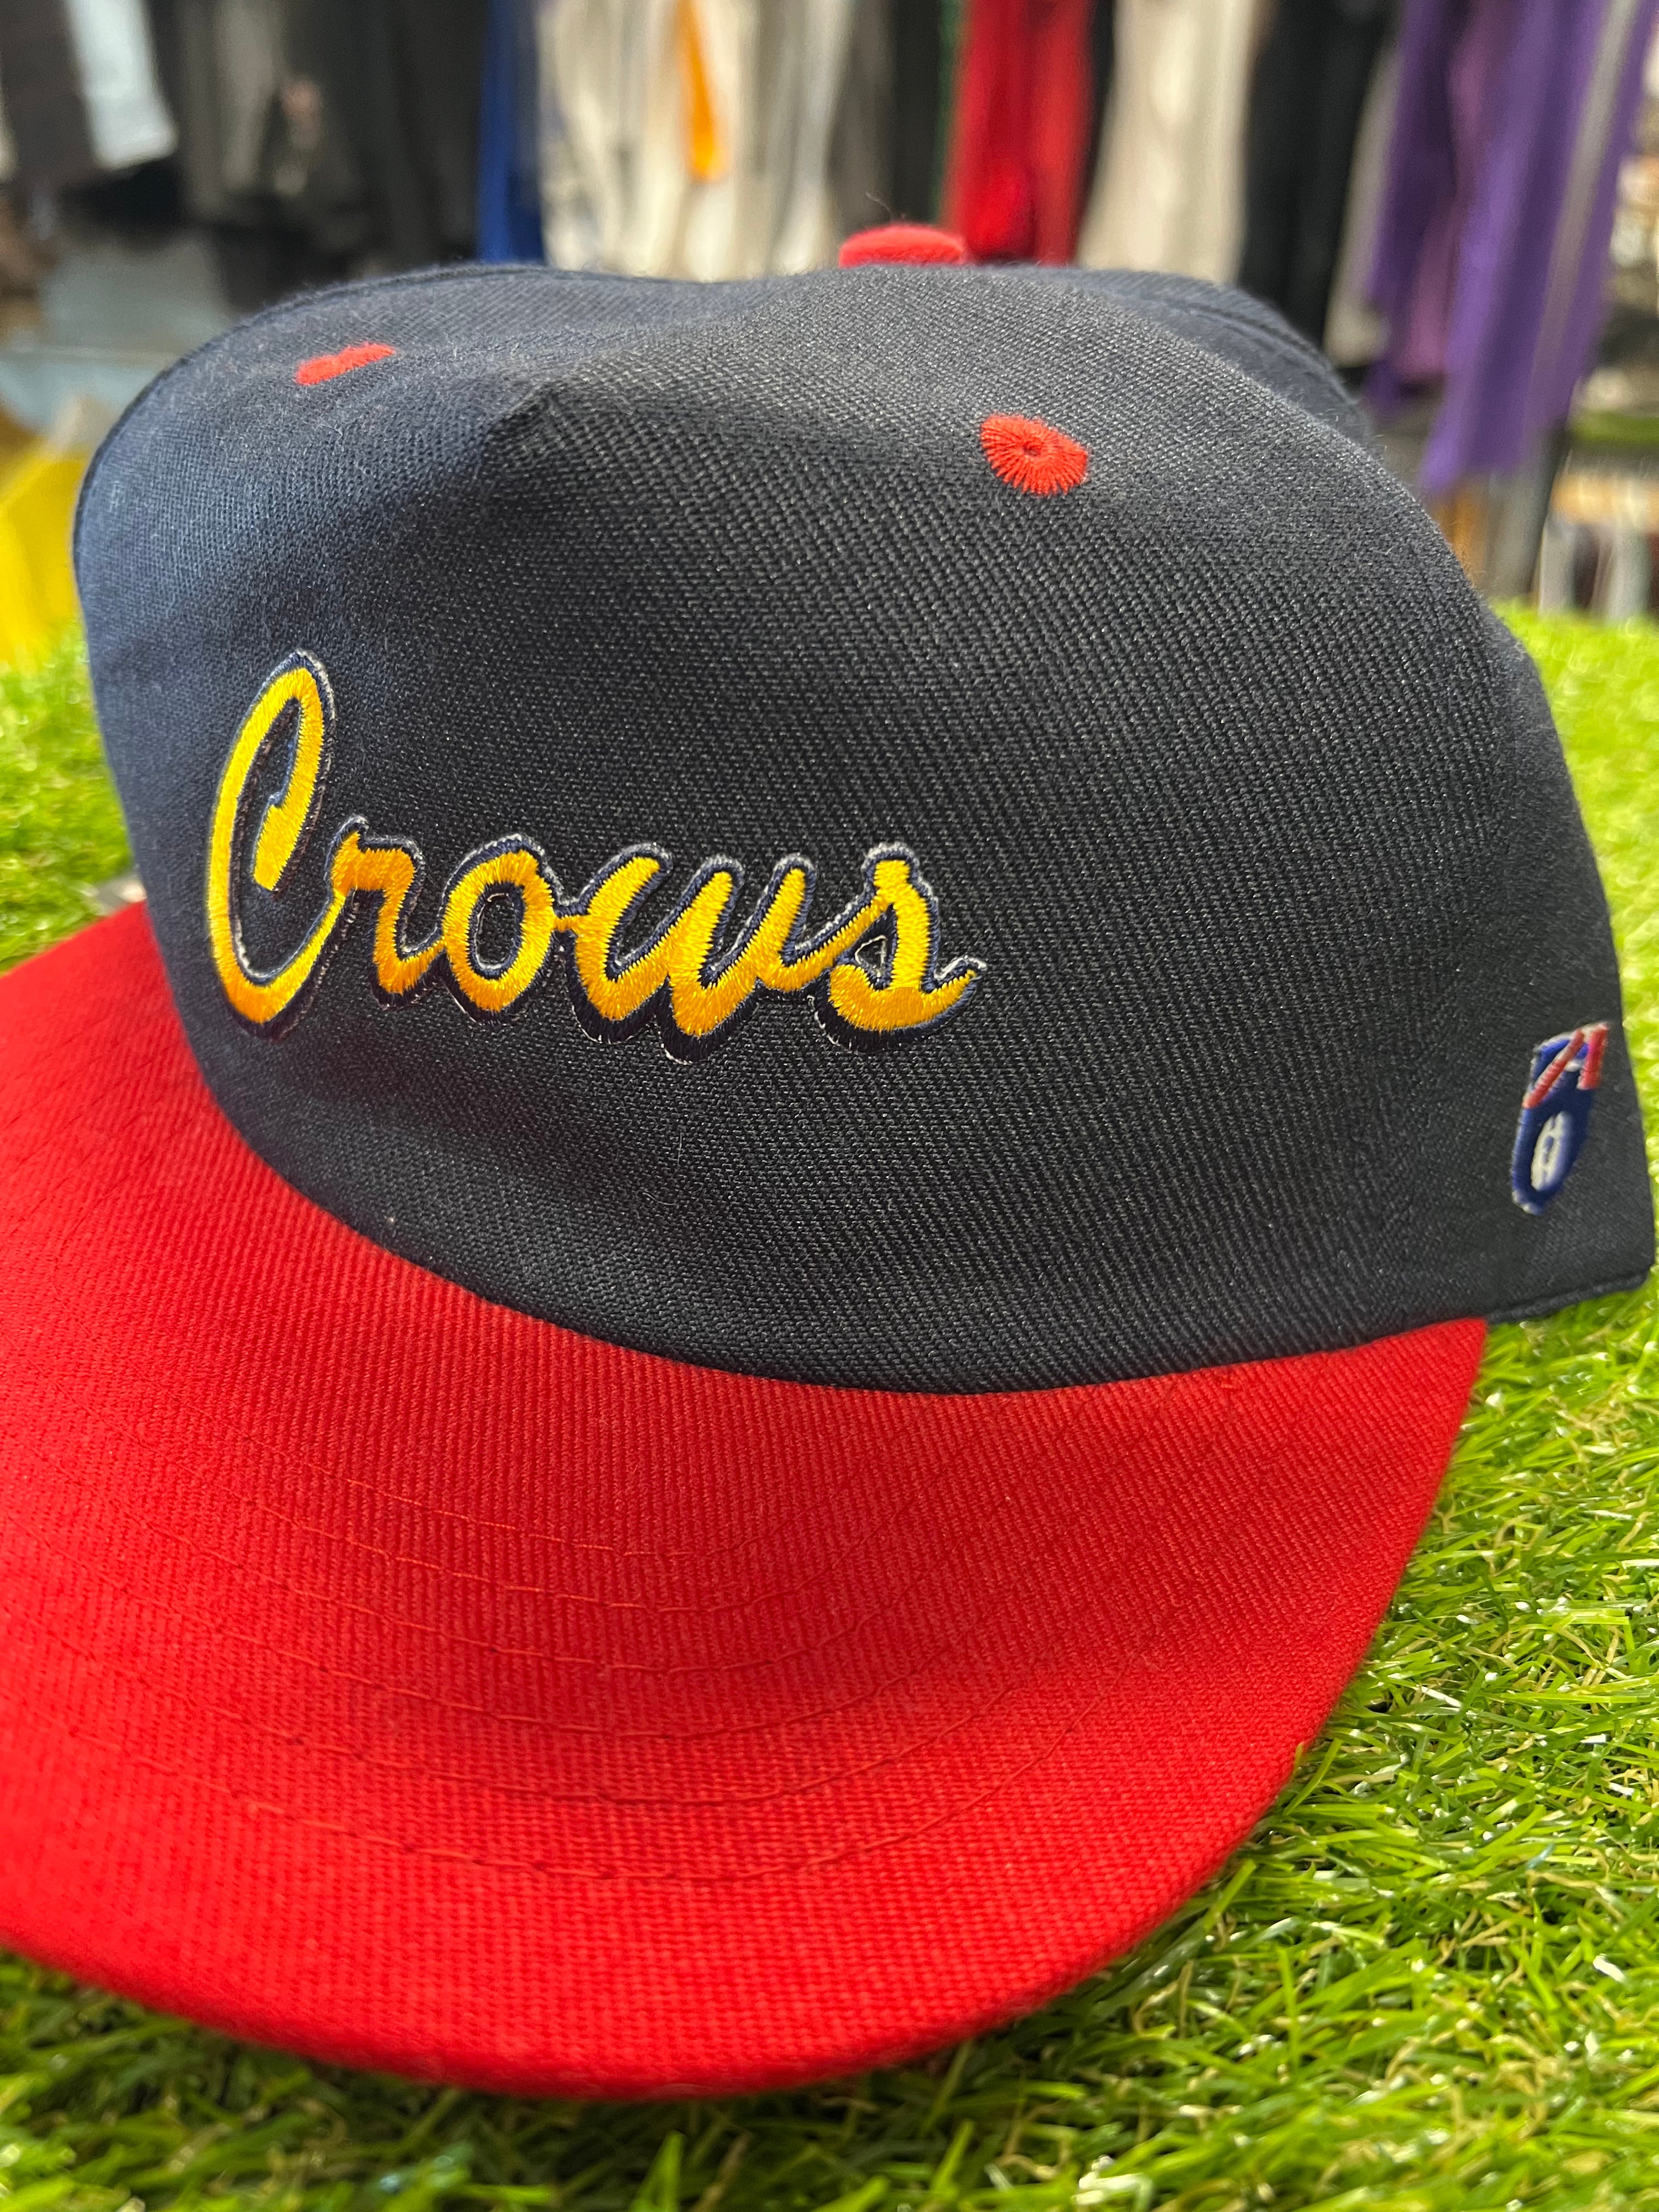 1990s Adelaide Crows - CROWS ST2